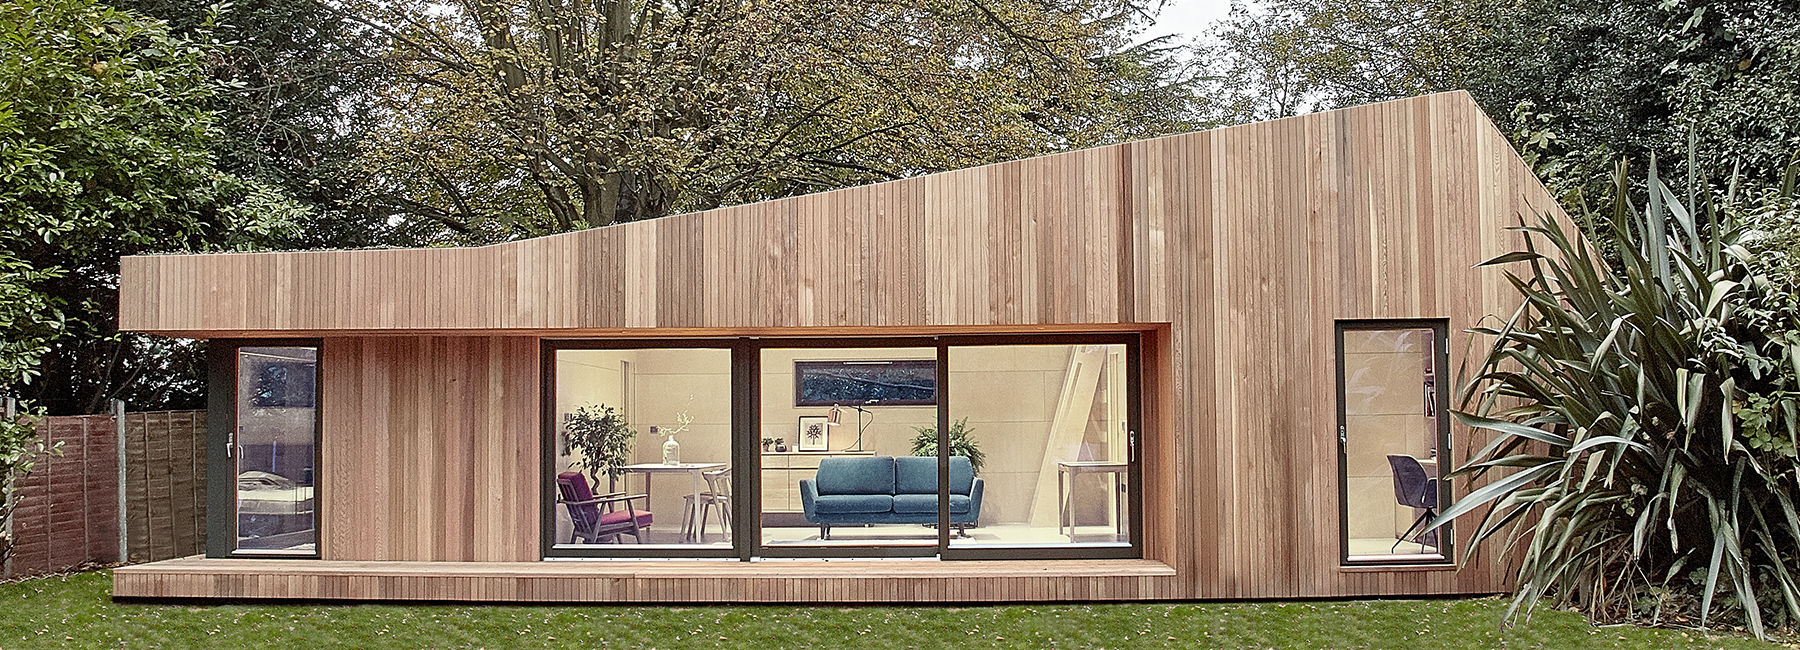 'ecospaces' are prefabricated, sustainable structures that can be built in just five days